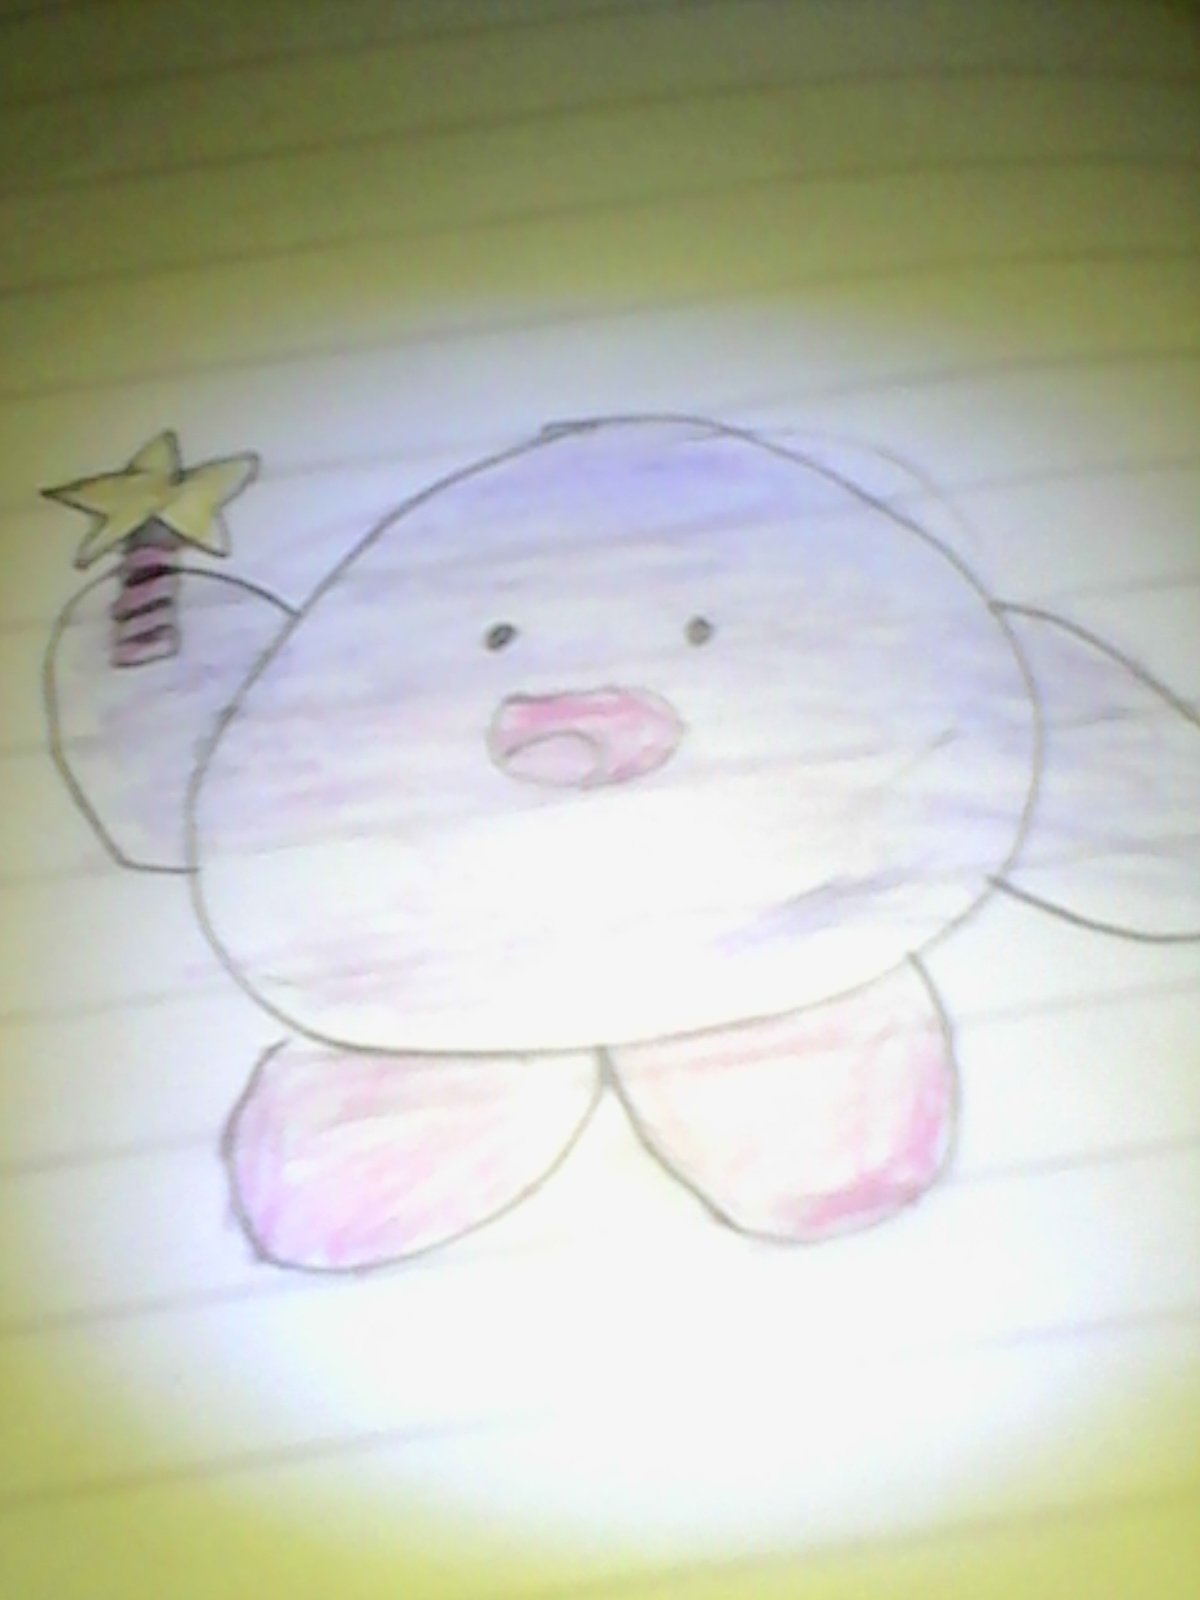 That one Kirby plushie, on paper.